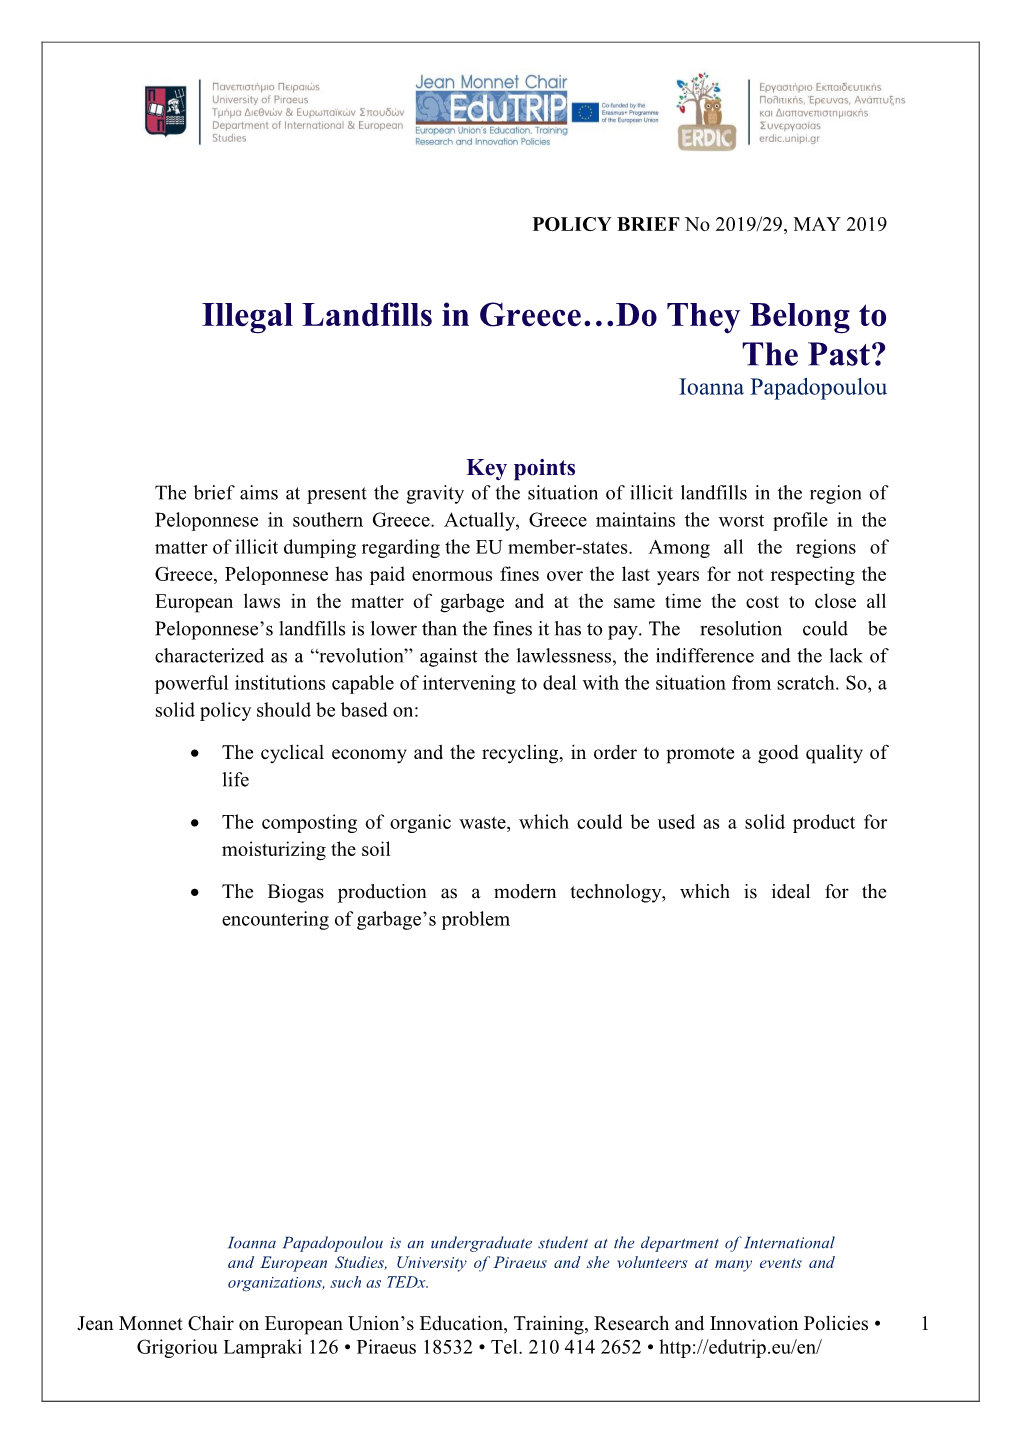 Illegal Landfills in Greece…Do They Belong to the Past? Ioanna Papadopoulou